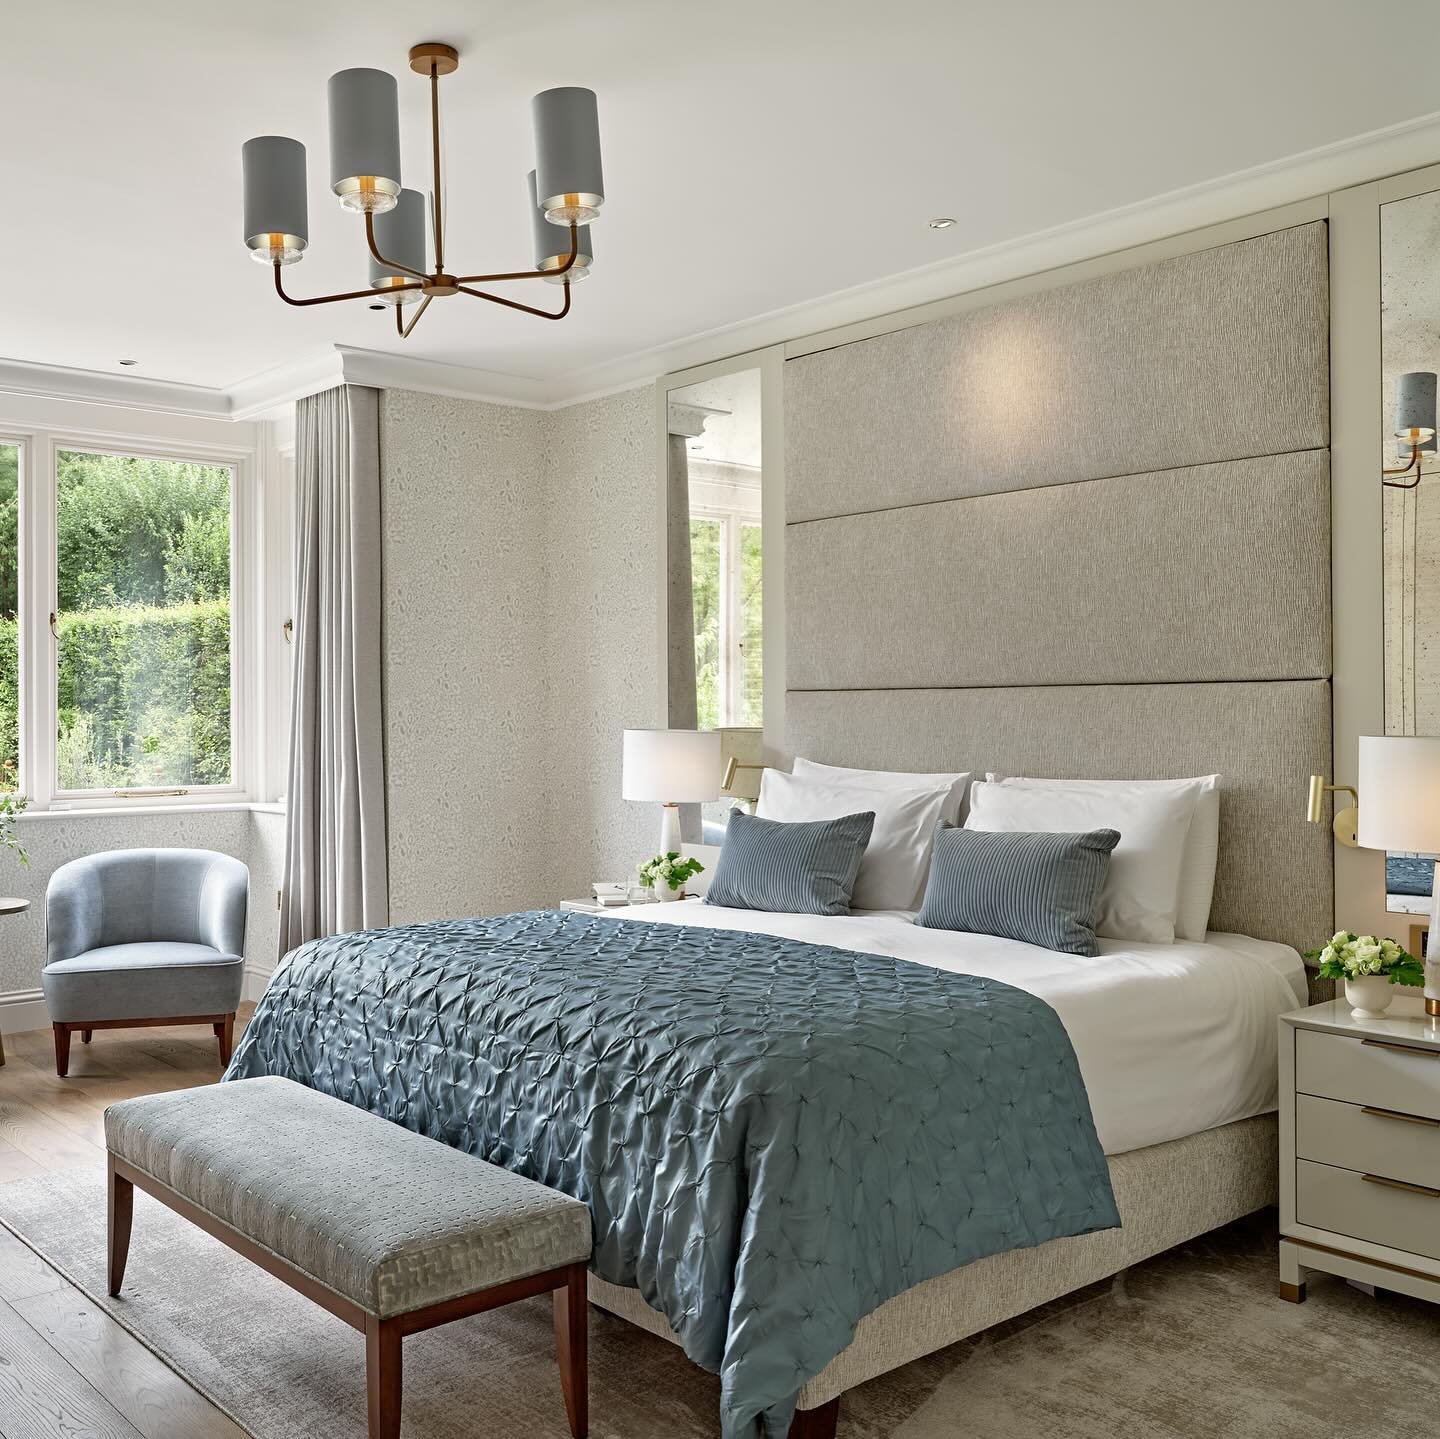 Lazy Sundays. with the kid&rsquo;s rugby season over I&rsquo;m looking forward to a little more chilling over the weekends. This main bedroom at our Wimbledon village project is so calm and relaxing. The client had always loved the Farrow and Ball le